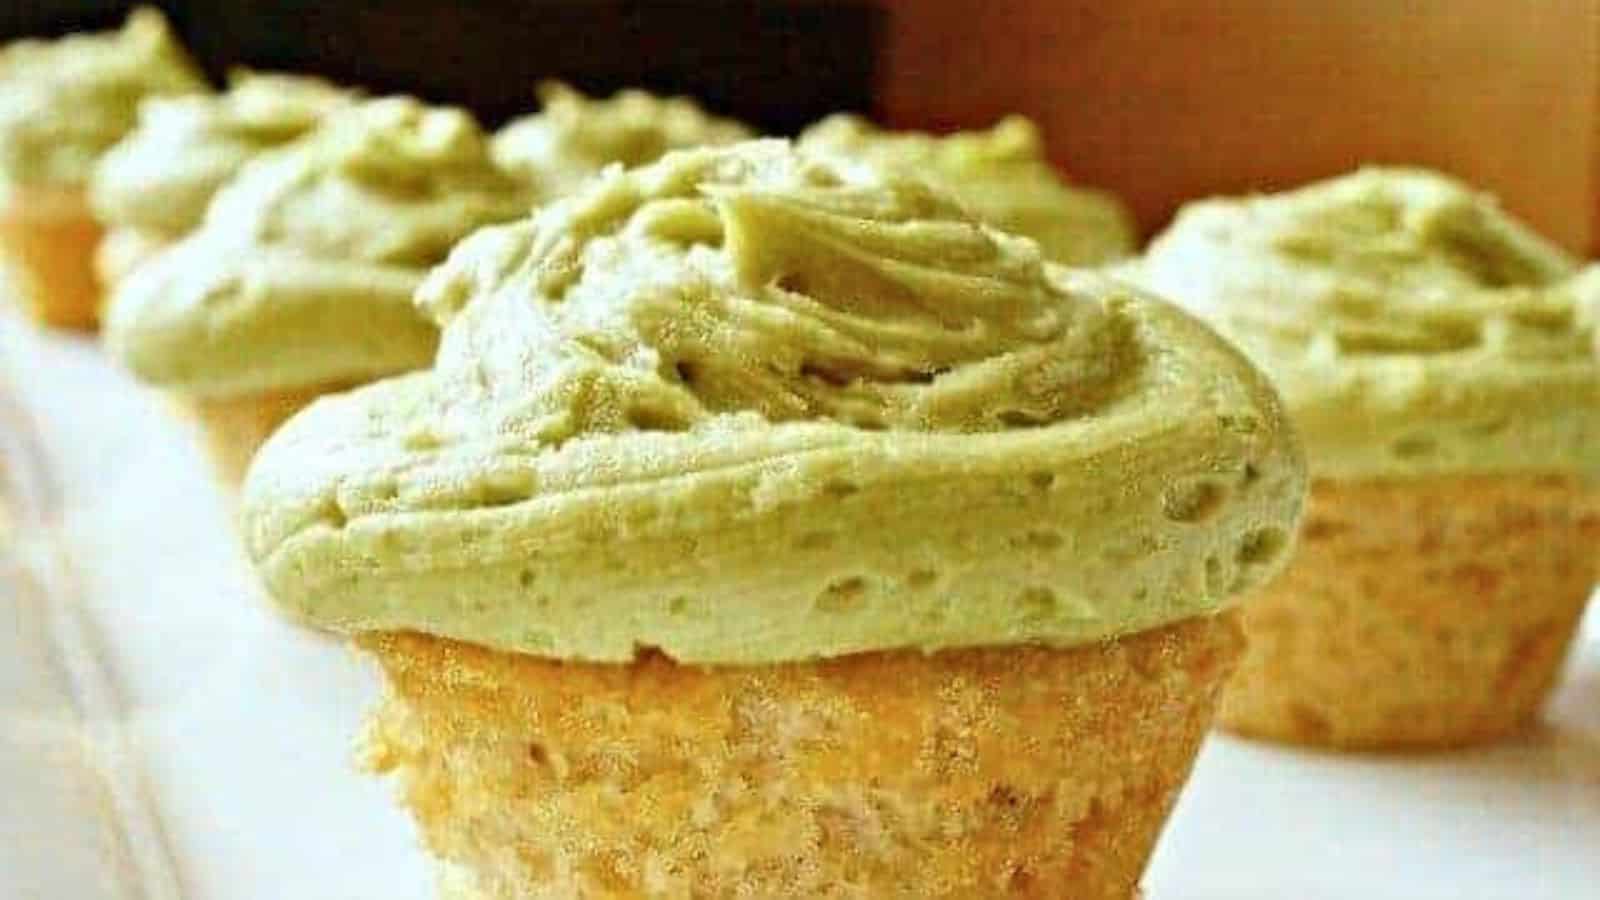 Image shows  Cupcakes with matcha frosting on a white plate.